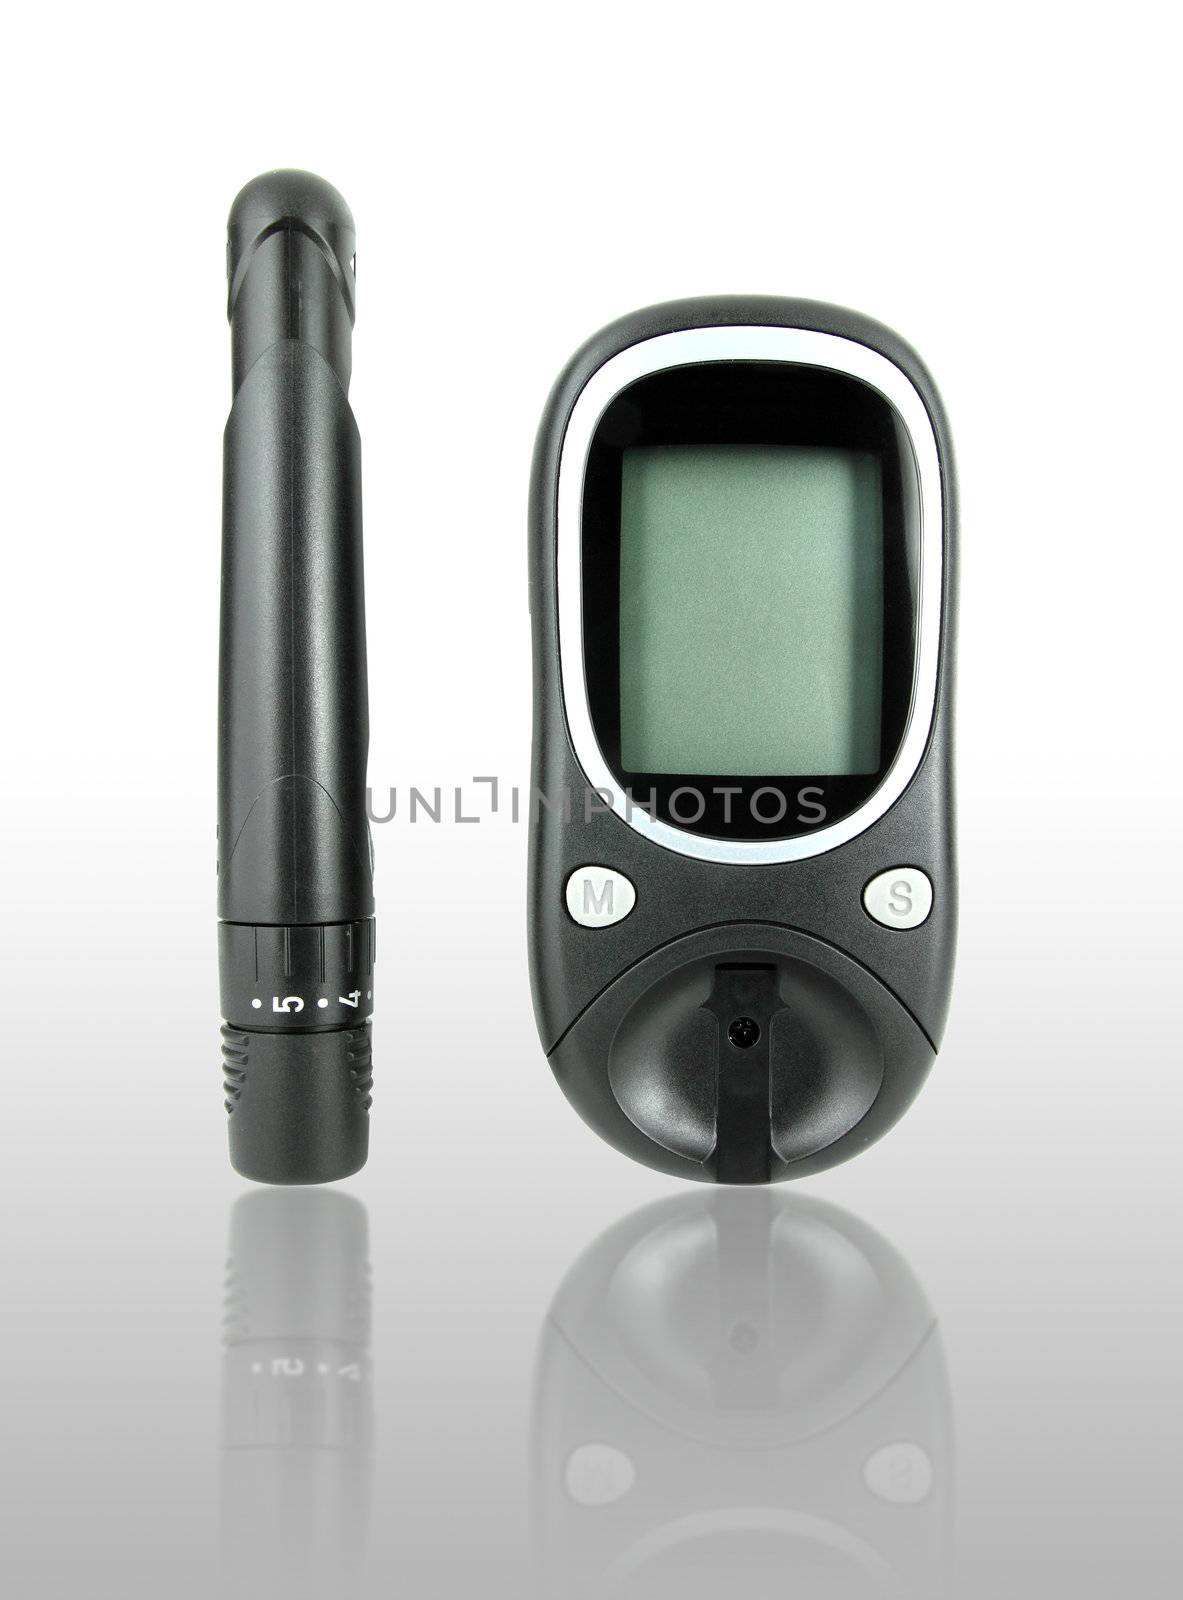 glucometer for checking blood sugar levels with shadow